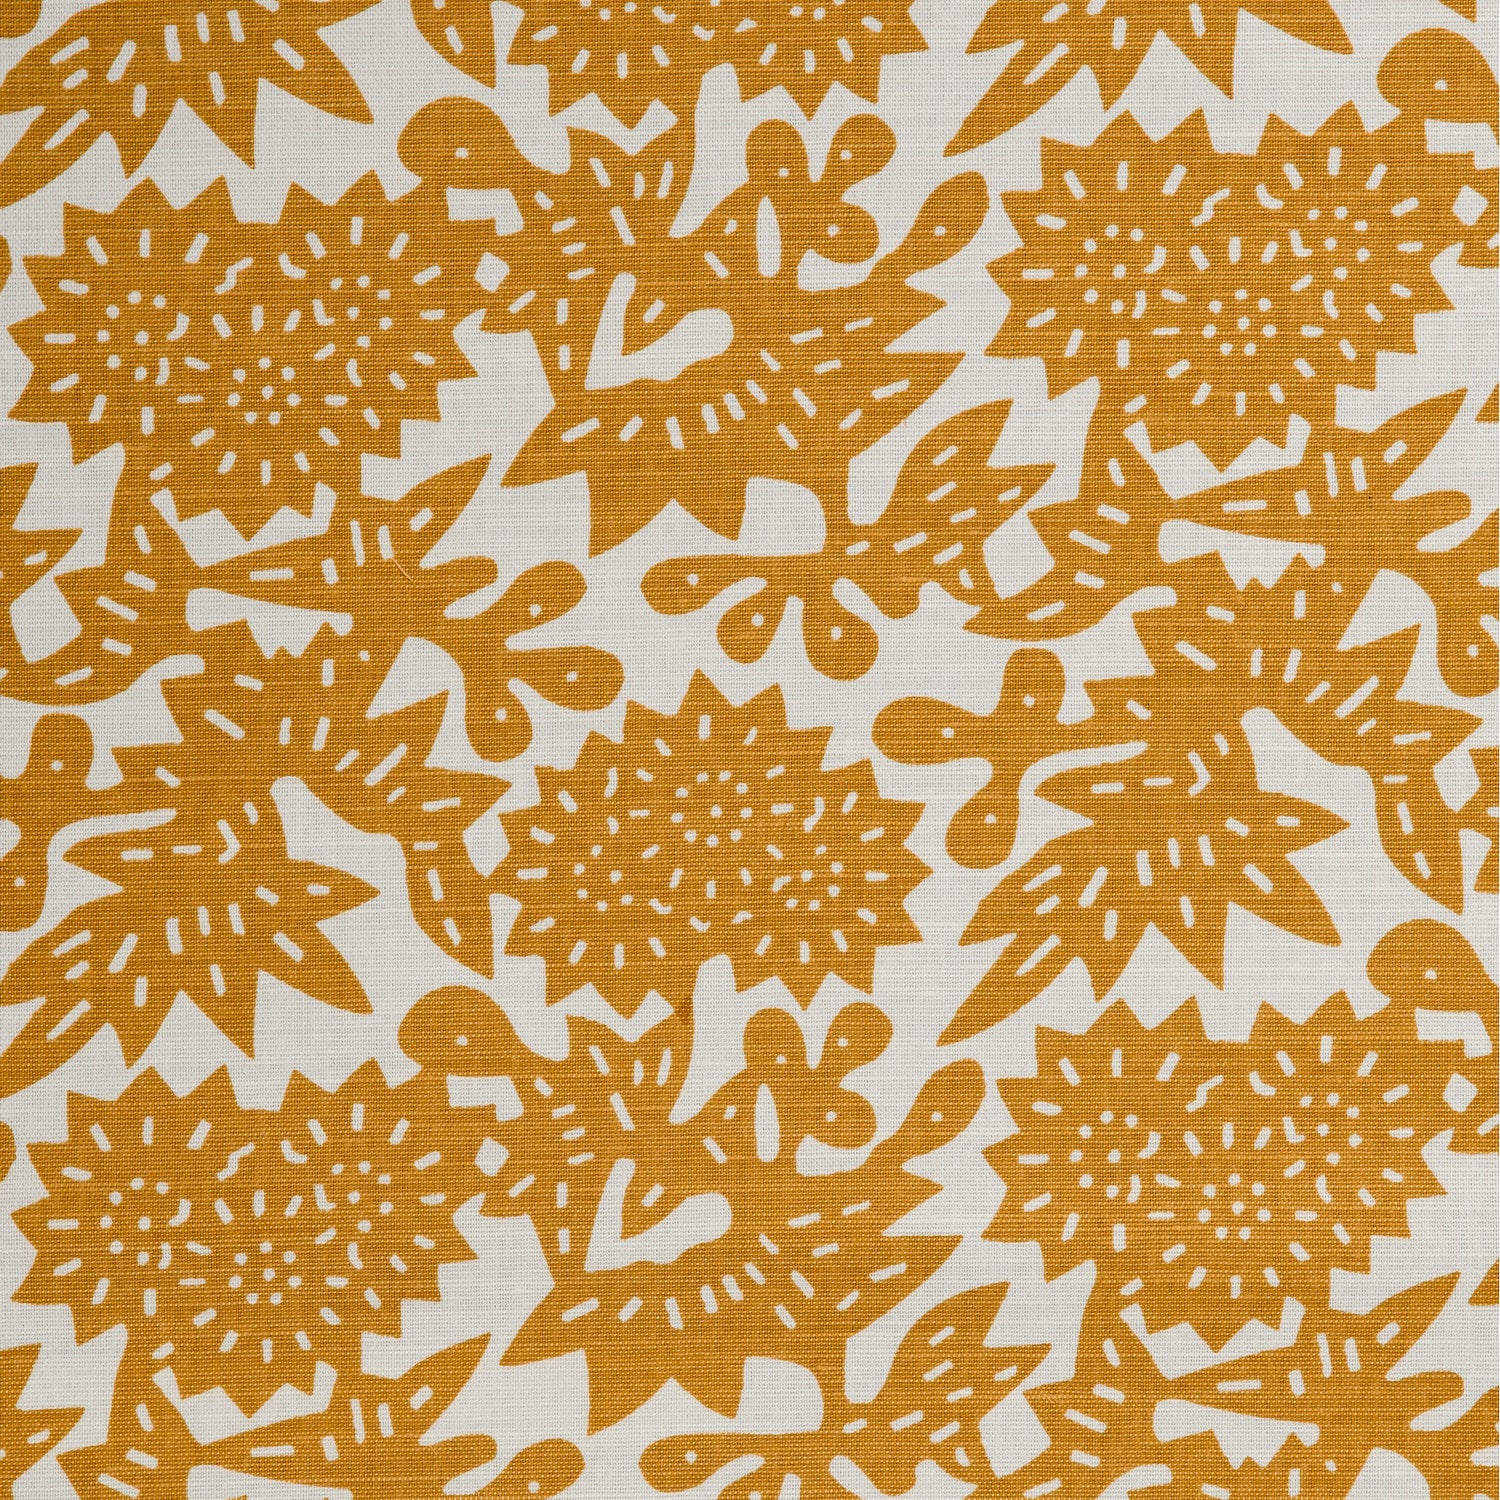 Detail of a linen-cotton fabric in a repeating geometric flower pattern in burnt orange on a white field.